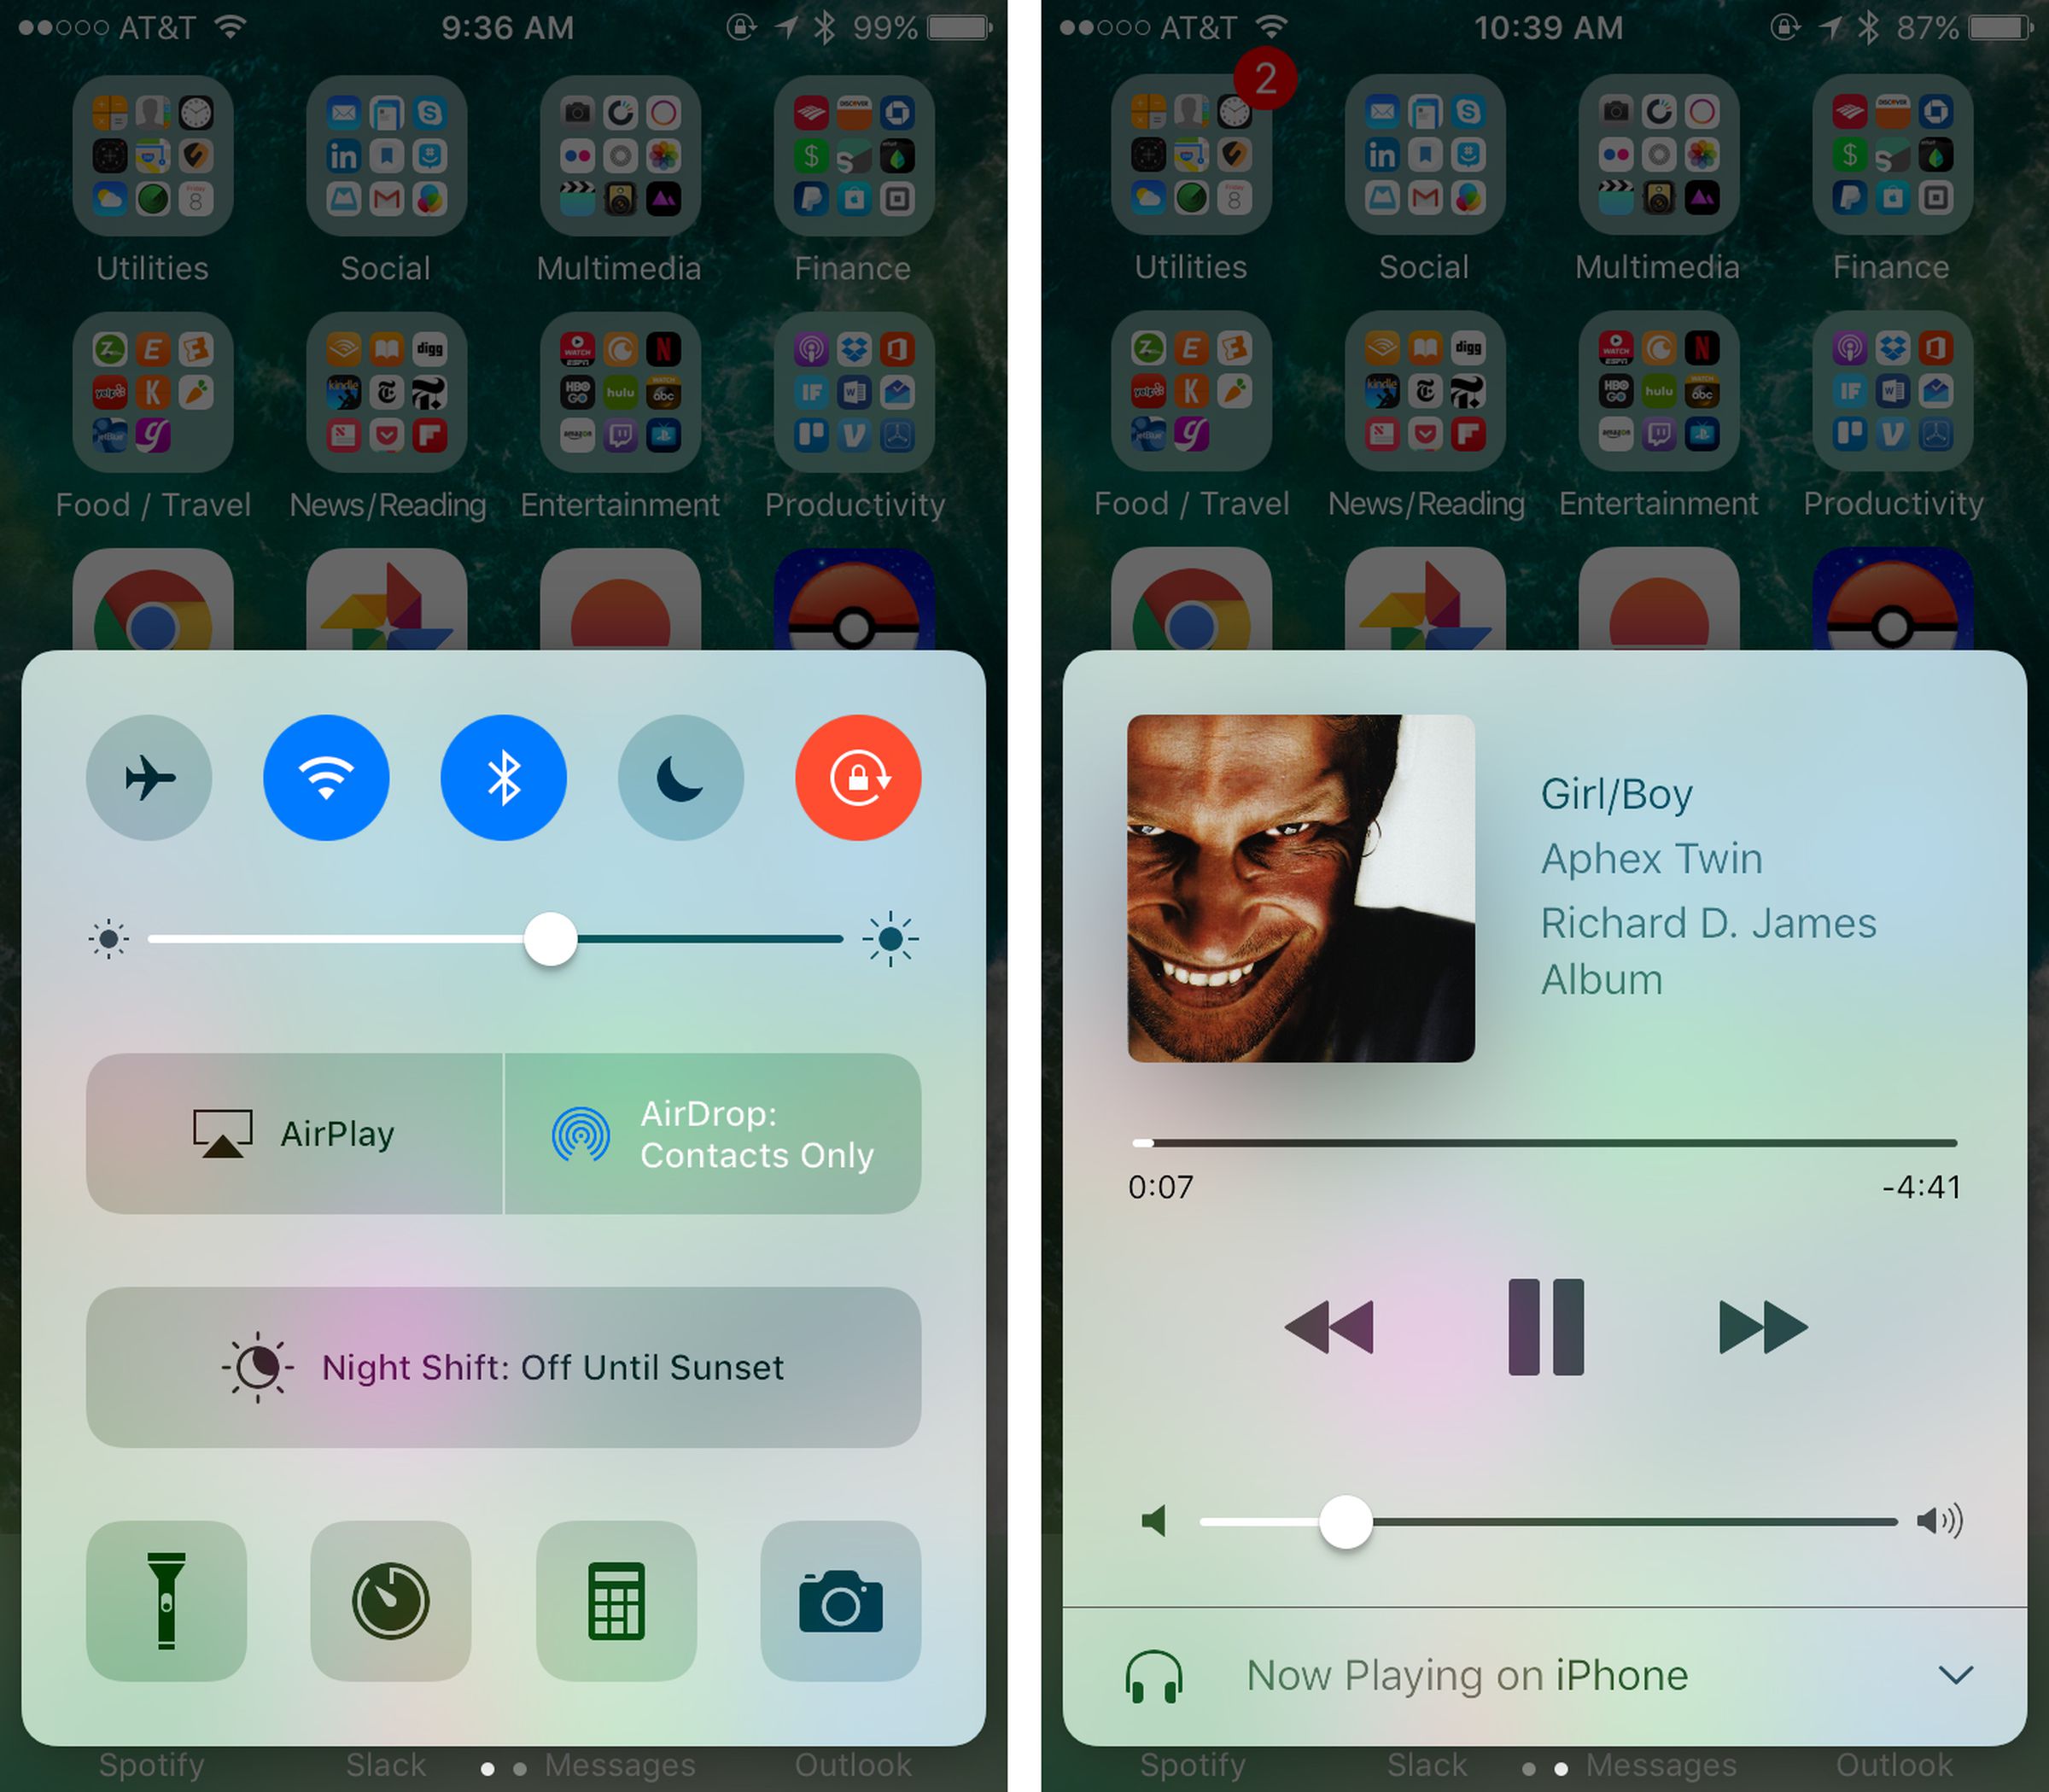 The old iOS 10 Control Center